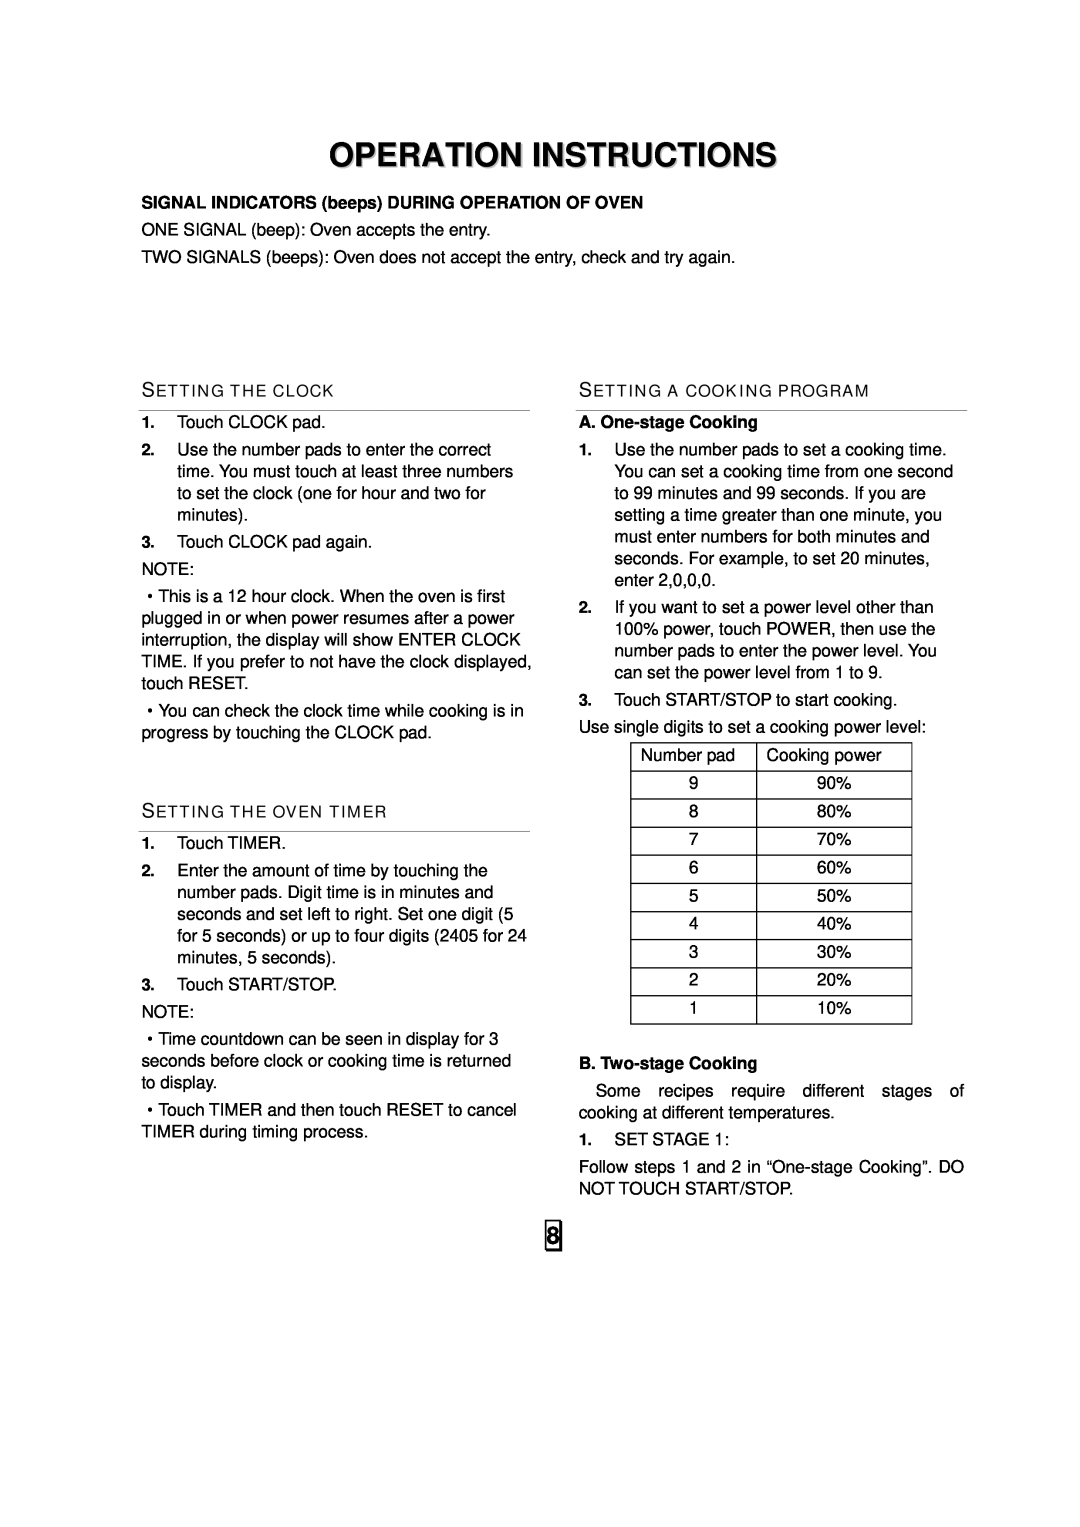 Sanyo EM-S7595S Operation Instructions, SIGNAL INDICATORS beeps DURING OPERATION OF OVEN, A. One-stageCooking 